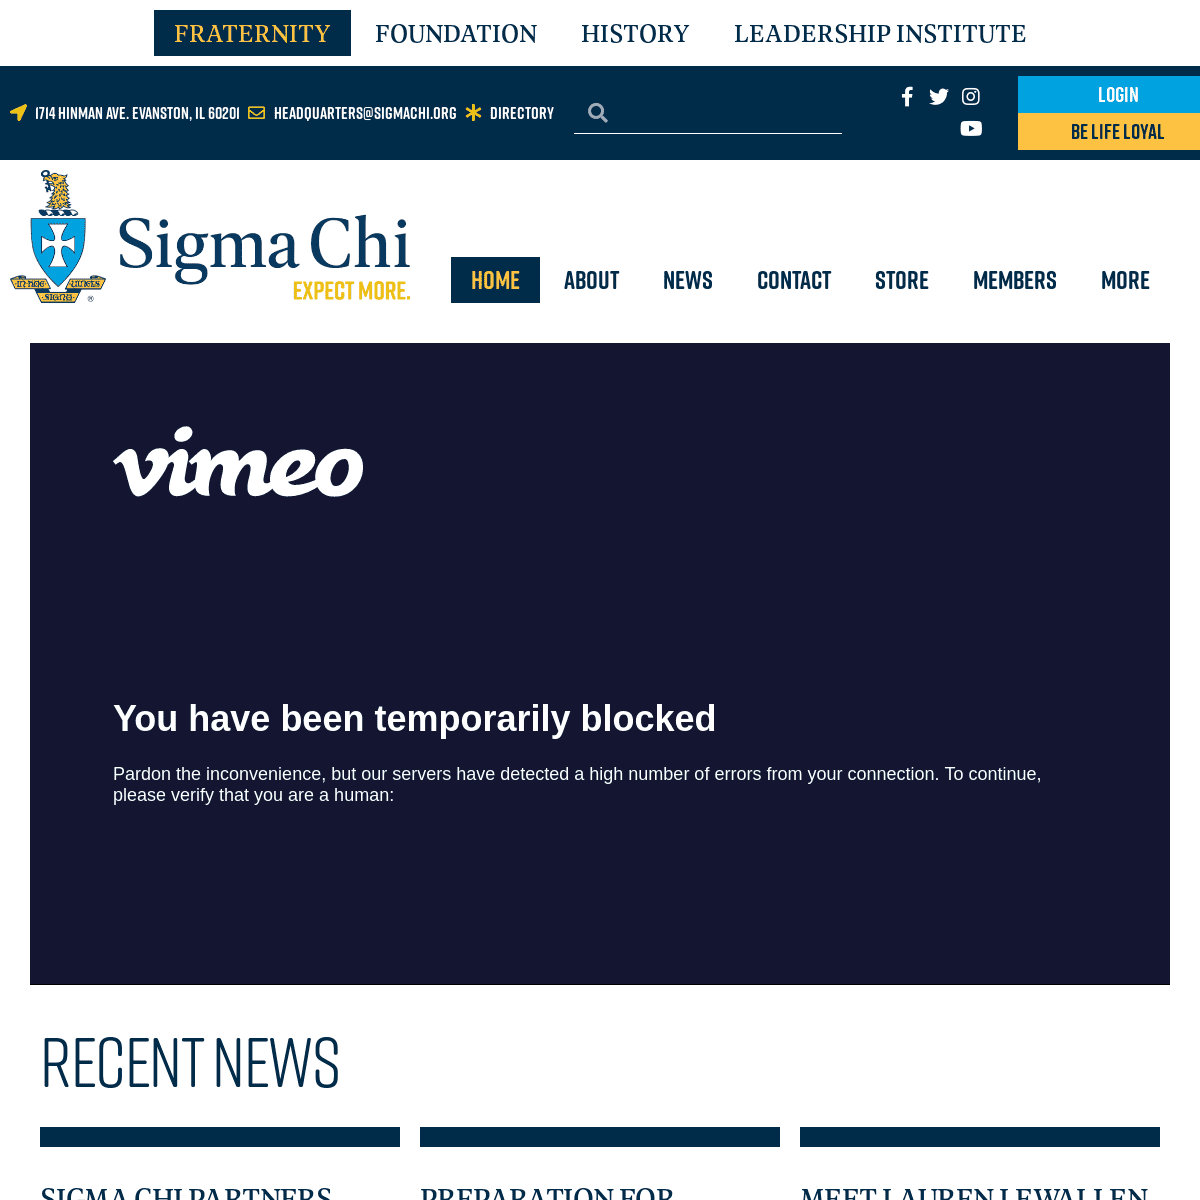 Sigma Chi – Friendship, Justice and Learning